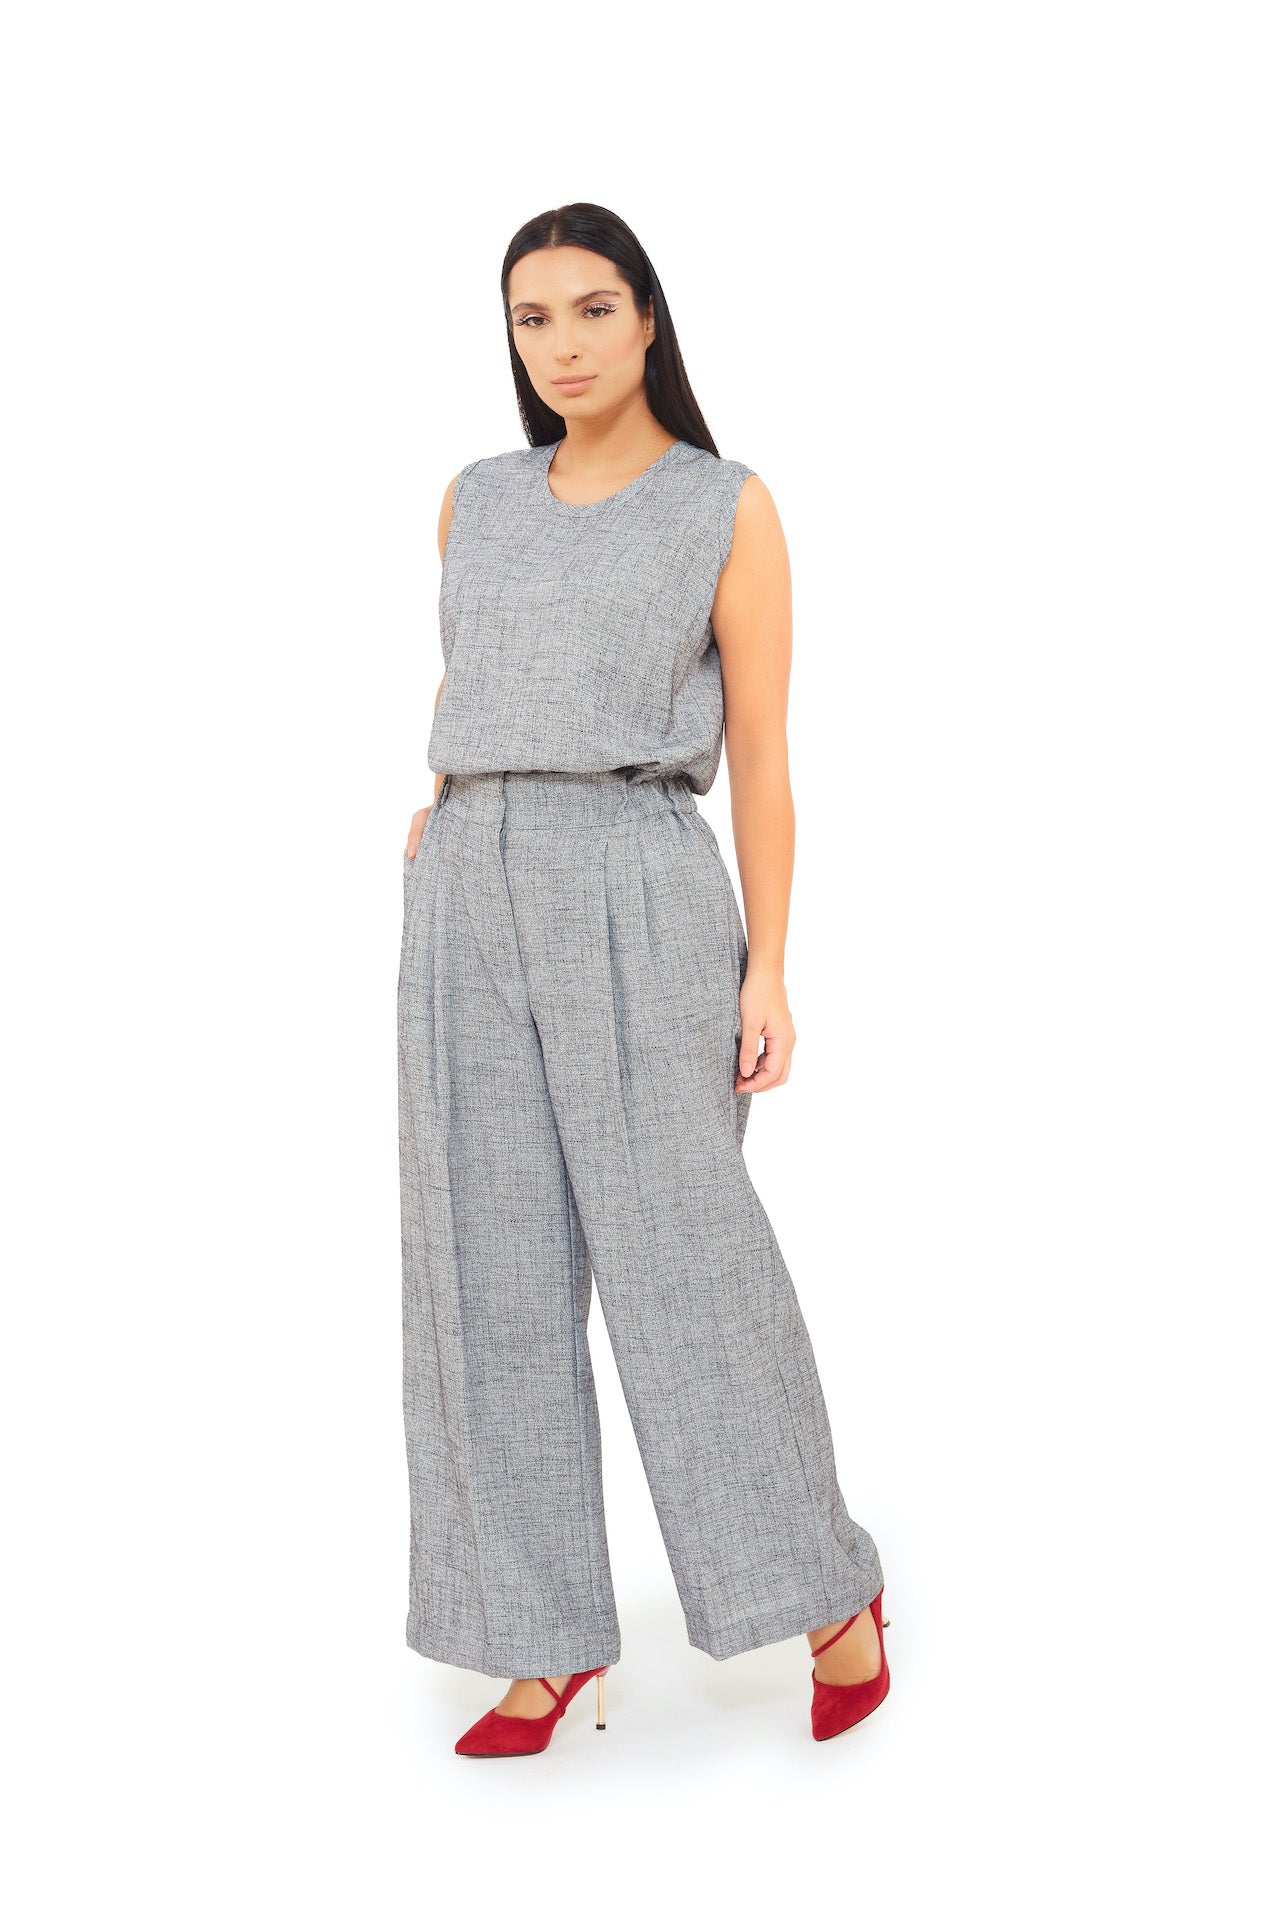 Chic Linen Set: Straight Wide Legs and Pockets